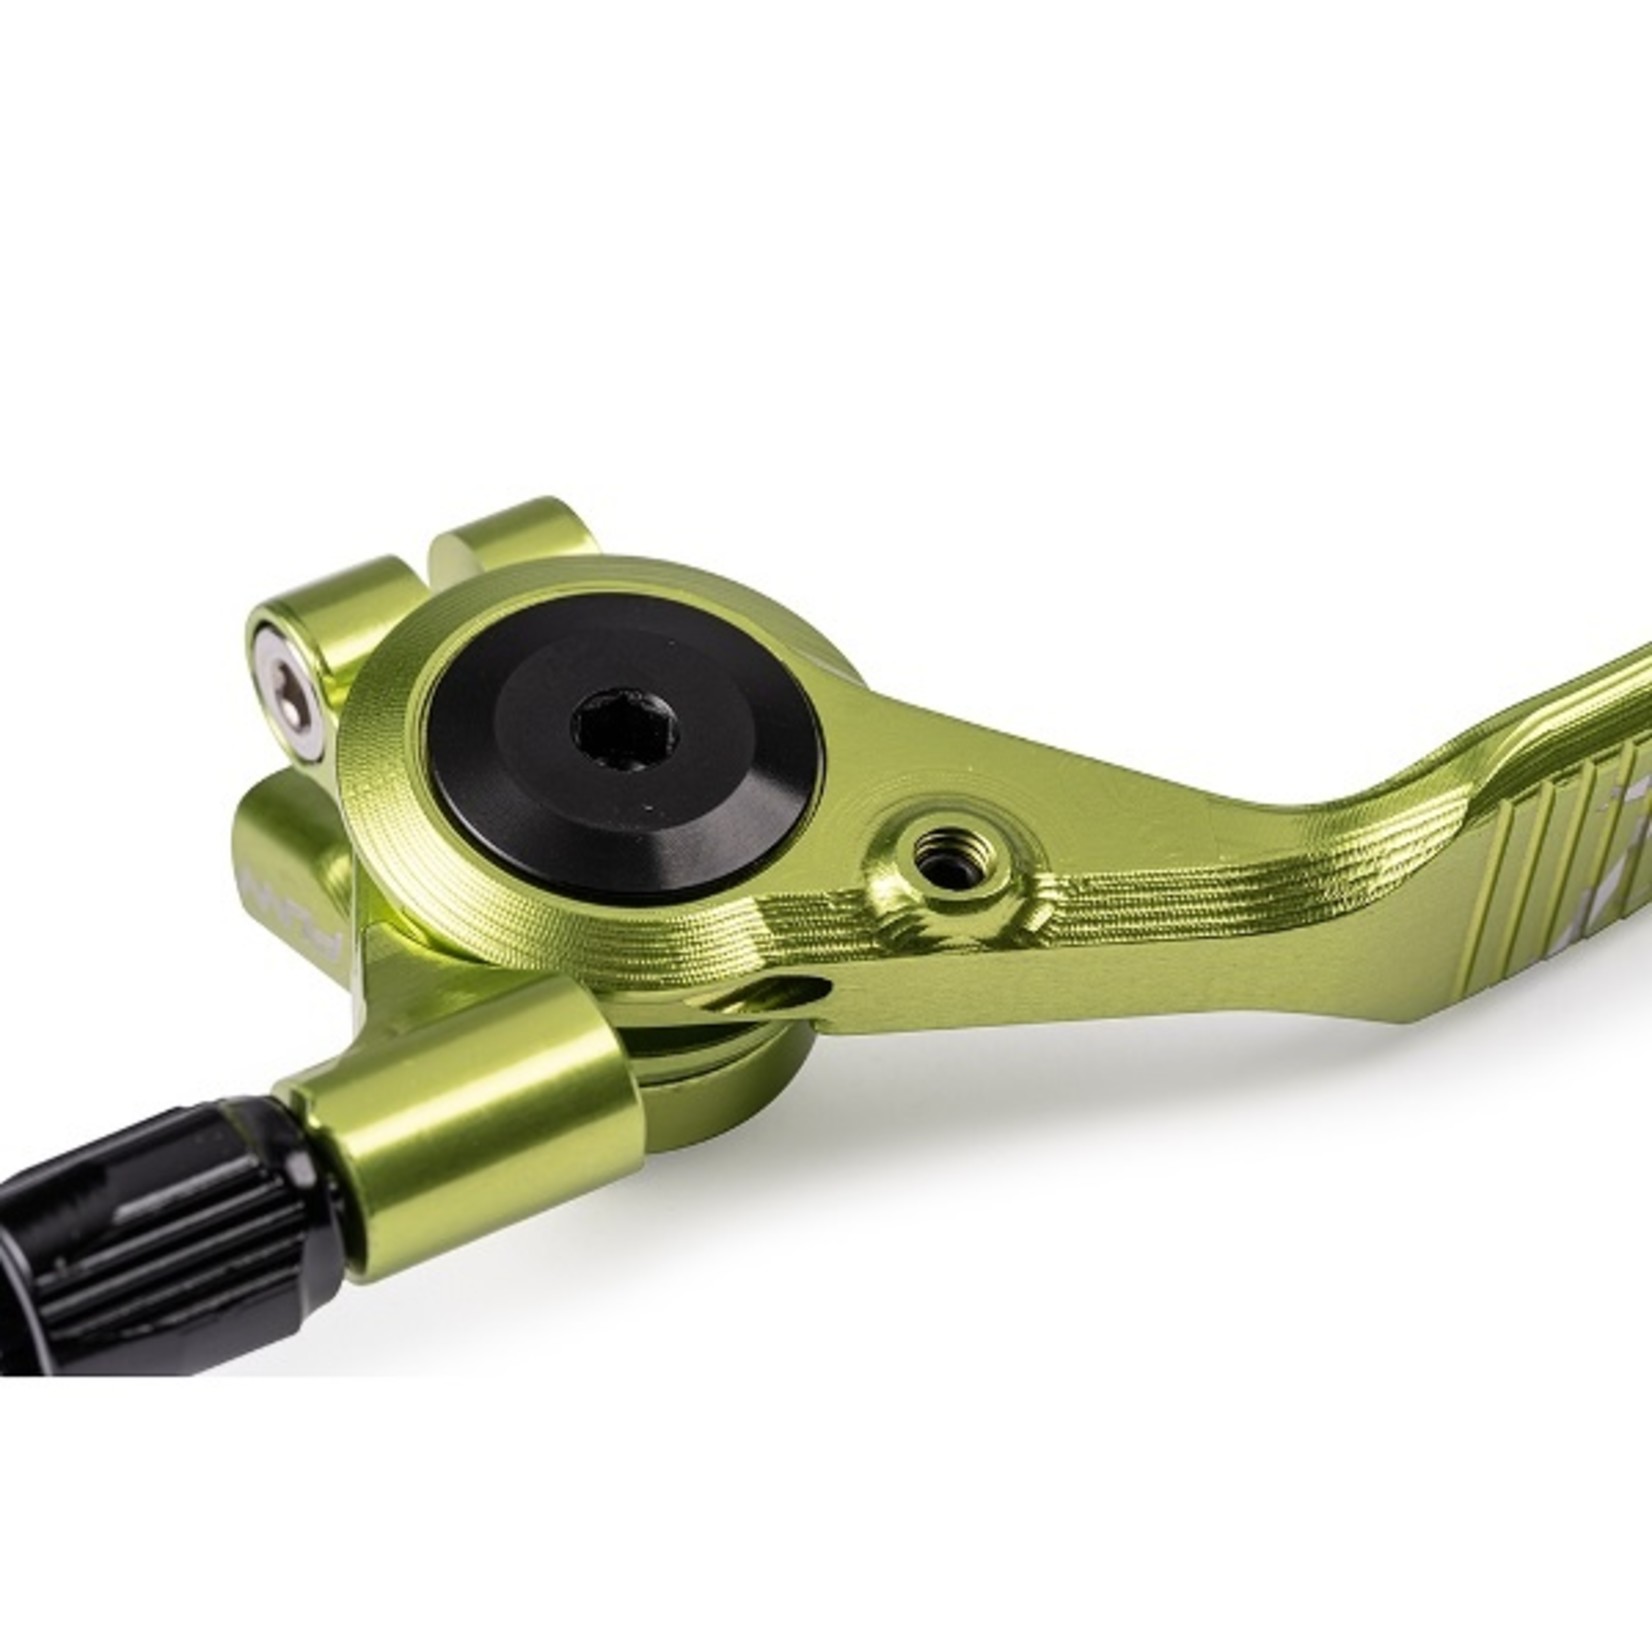 FUNN Funn Remote Updown Lever - Fits Exterrnal & Internal Routing Droppers AL6061 - Wasabi Green